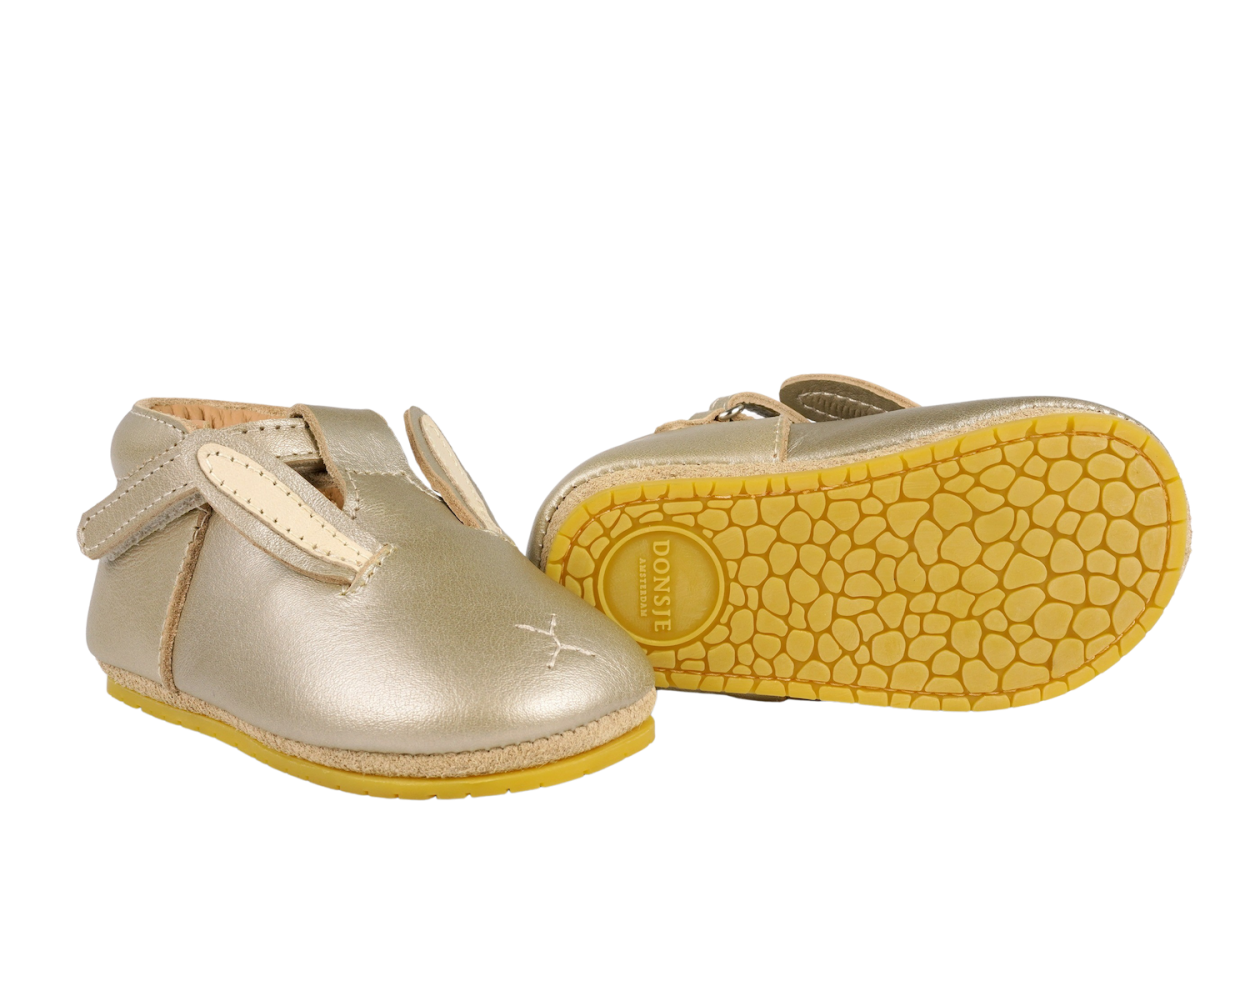 Blinc Shoes | Bunny | Champagne Metallic Leather